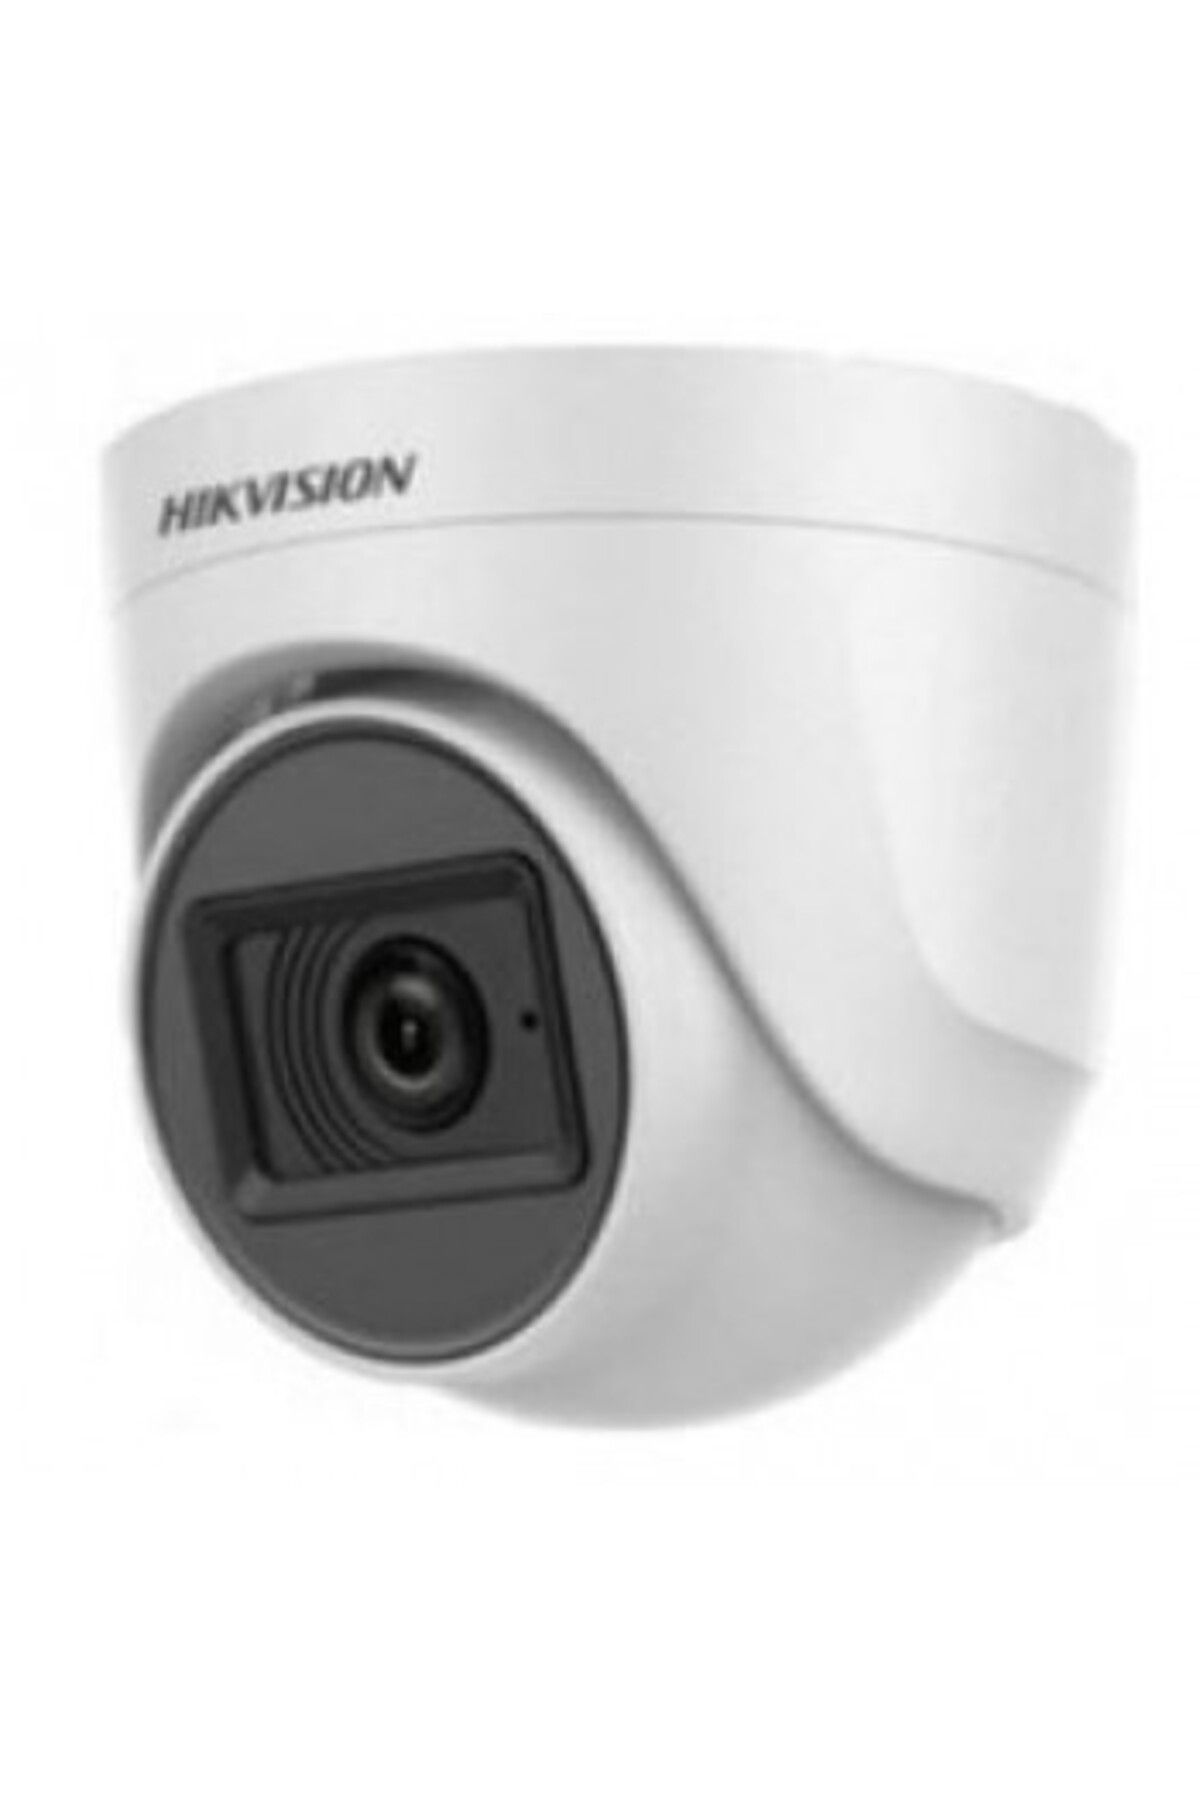 Hikvision DS-2CE76D0T-EXIPF 2MP 2.8MM AHD DOME KAMERA